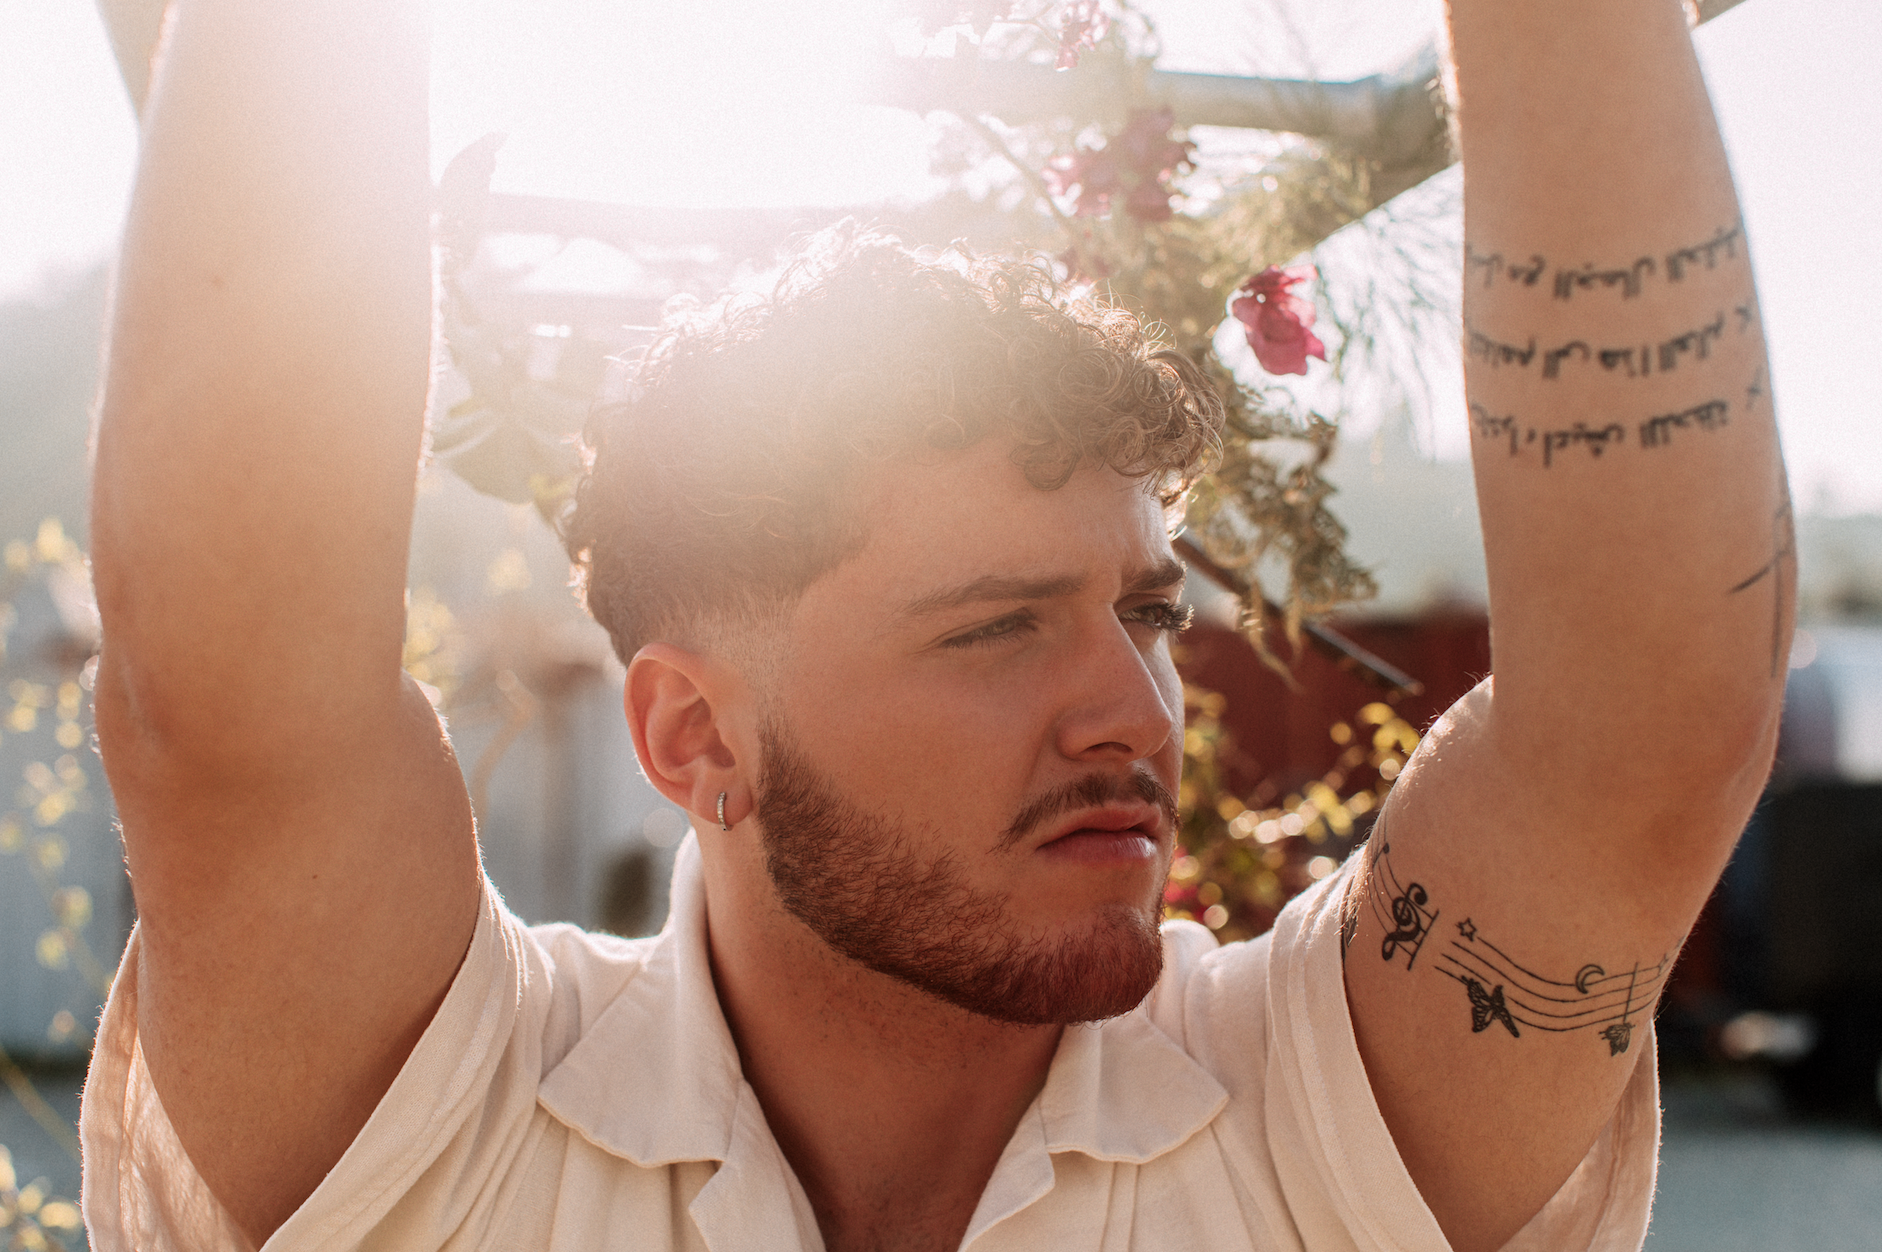 Bazzi is Going to Get Covered in Tattoos - GQ